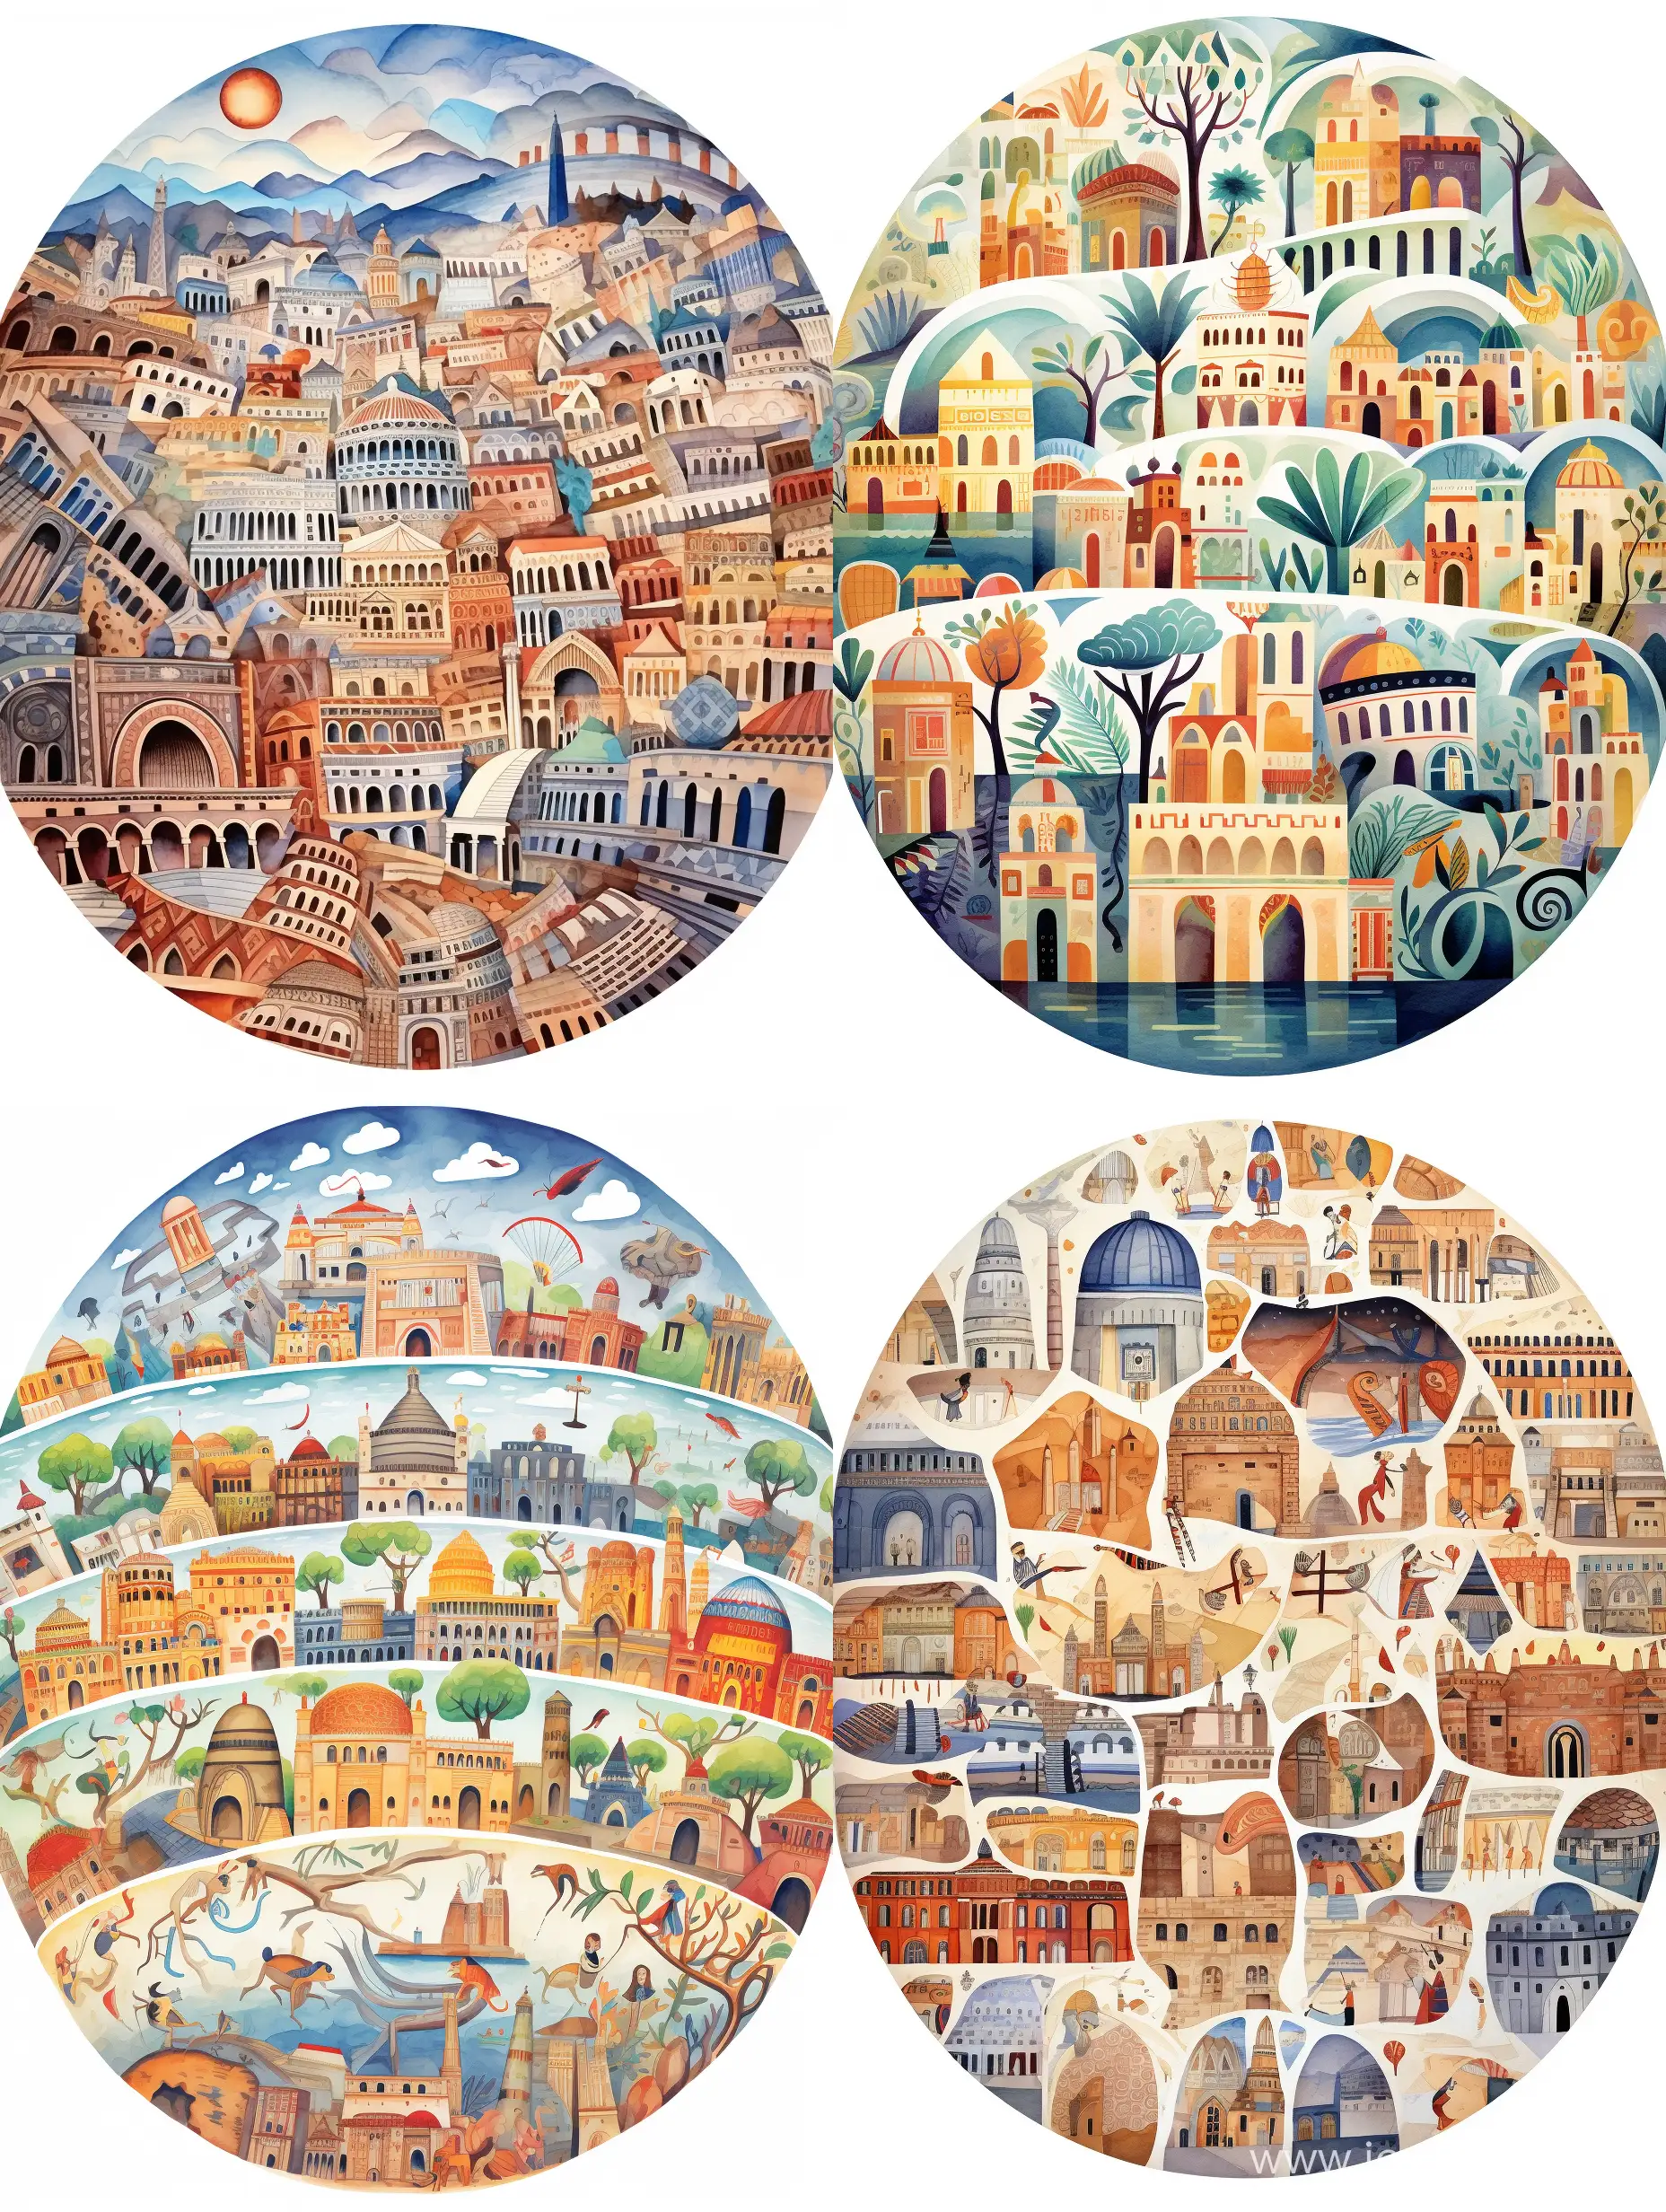 Oval pattern of ancient cities: Chinese, Aztec, Egyptian, Roman, fabulous illustration, stylized caricature, Victor Gai, watercolor, decorative, flat drawing.